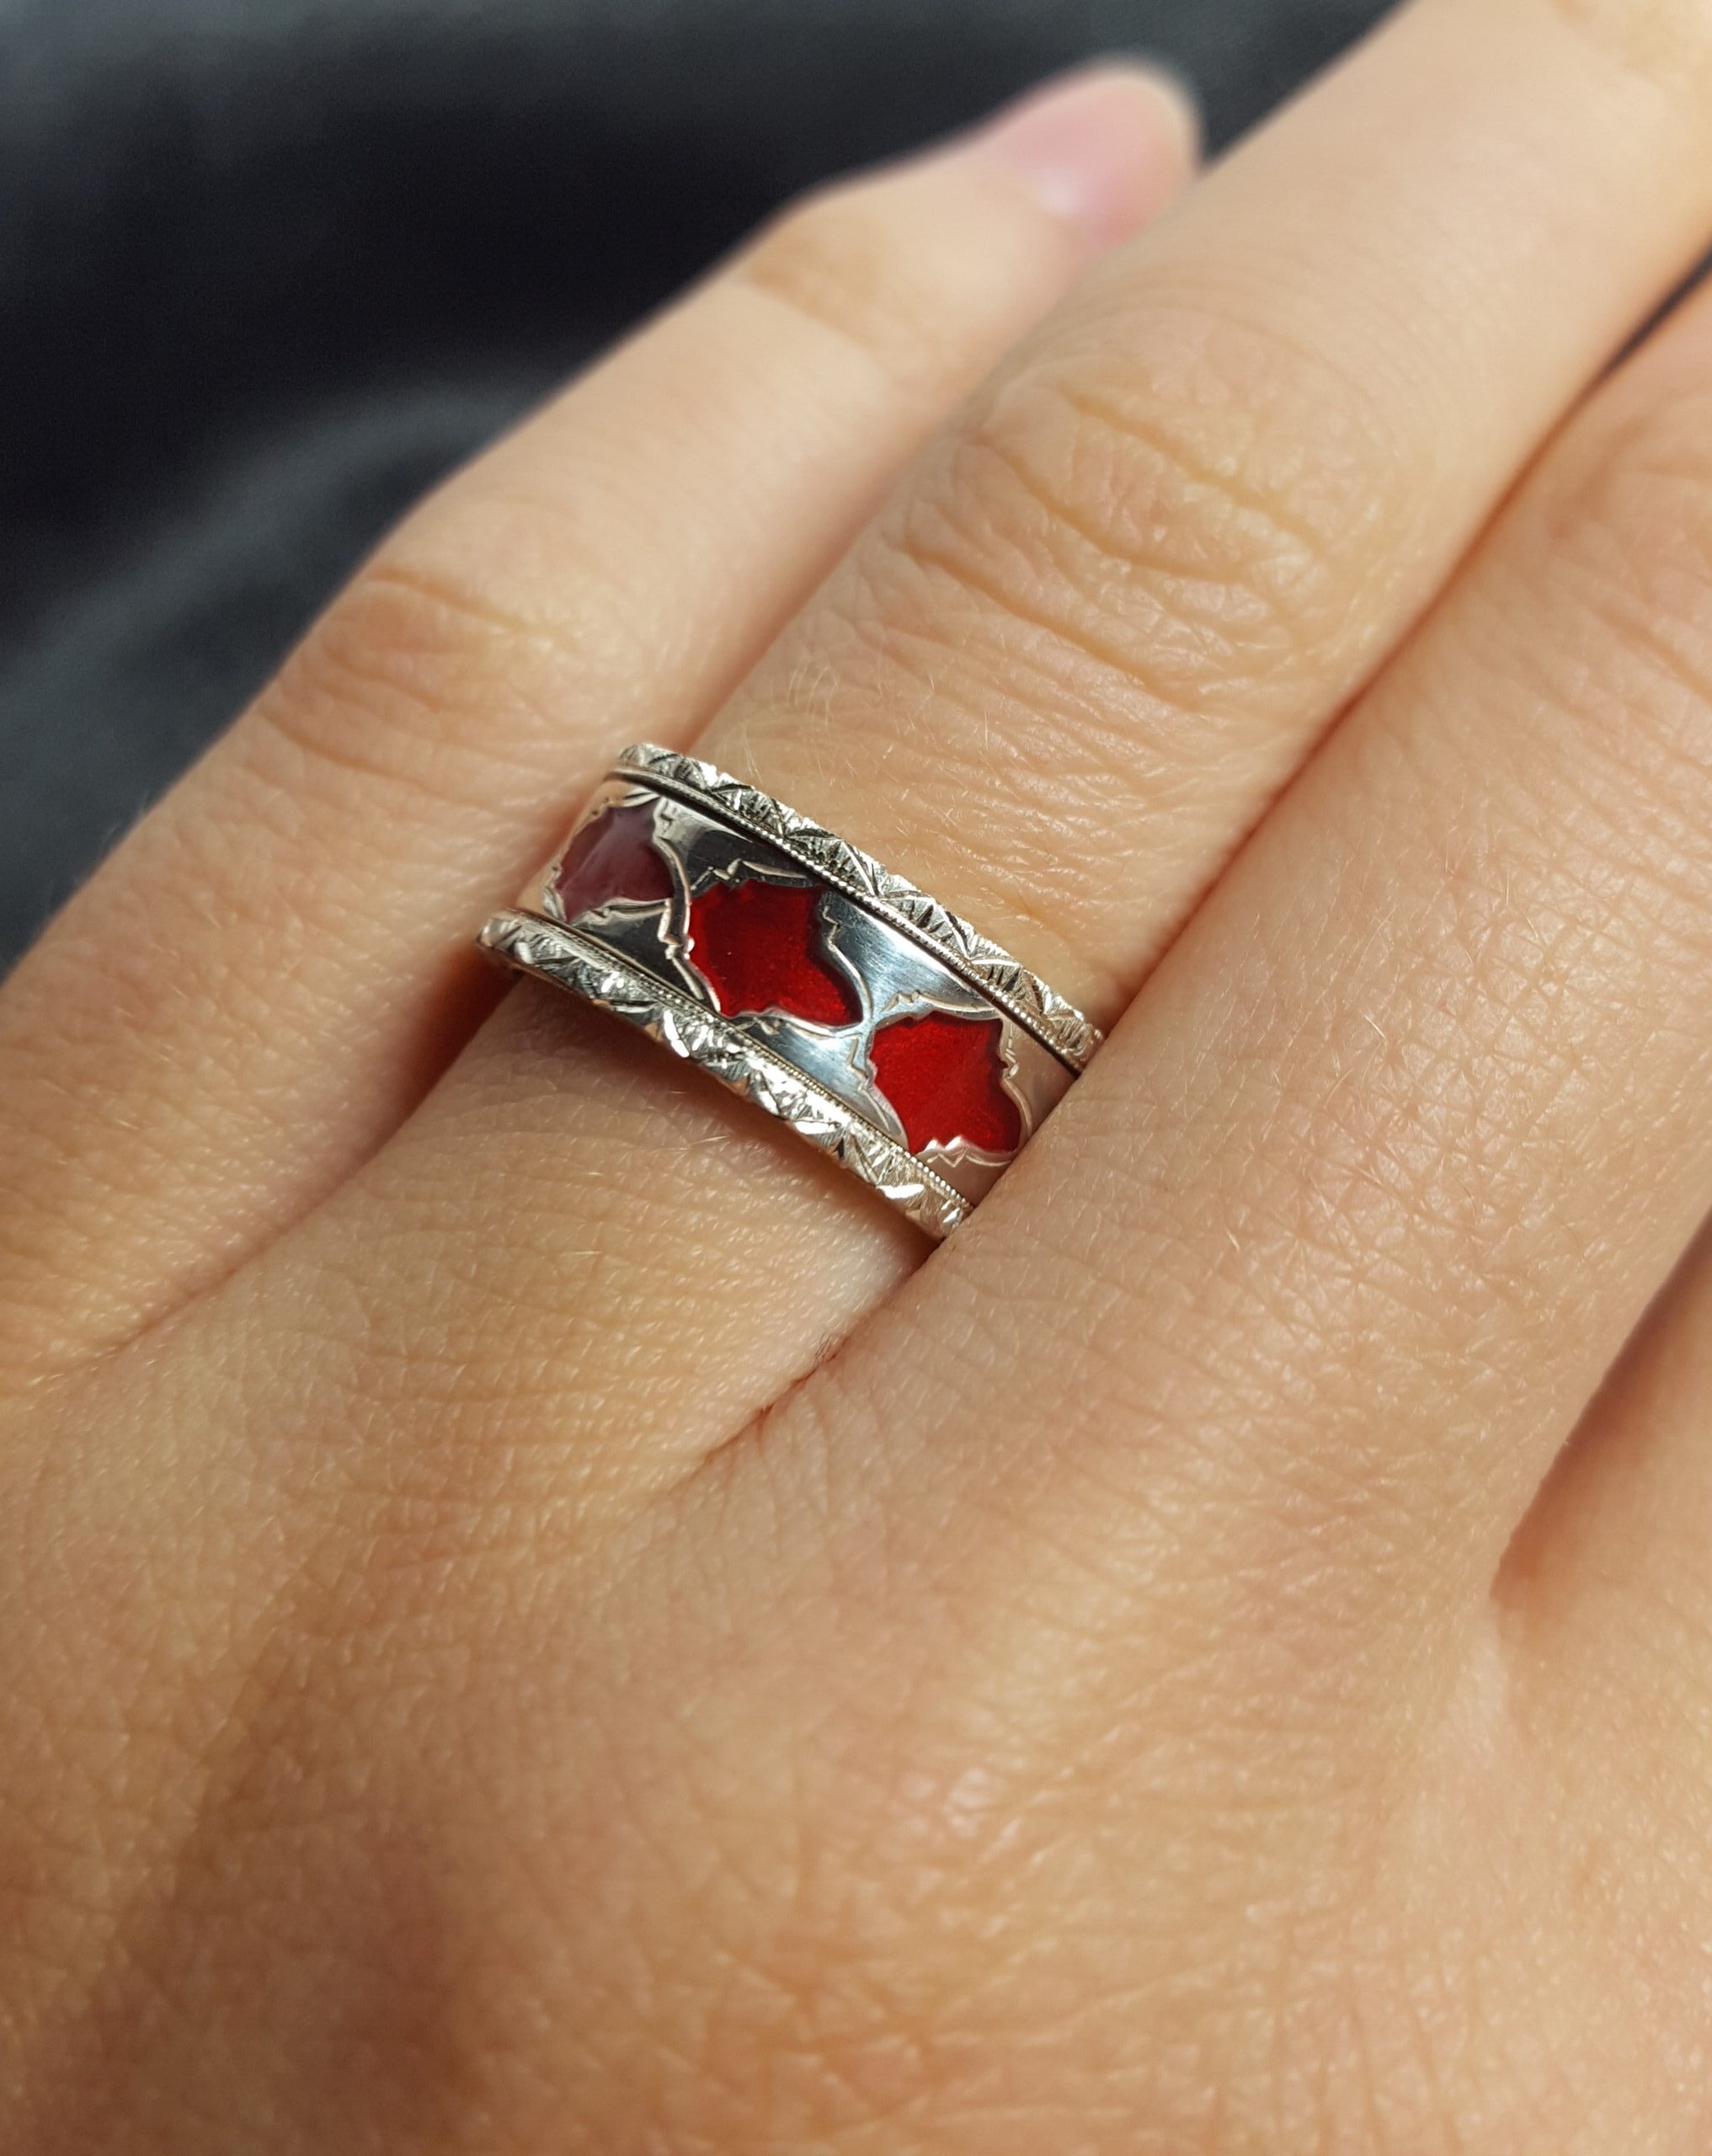 Ring composed of three combinable parts in silver and red enamel from the Marrakech collection